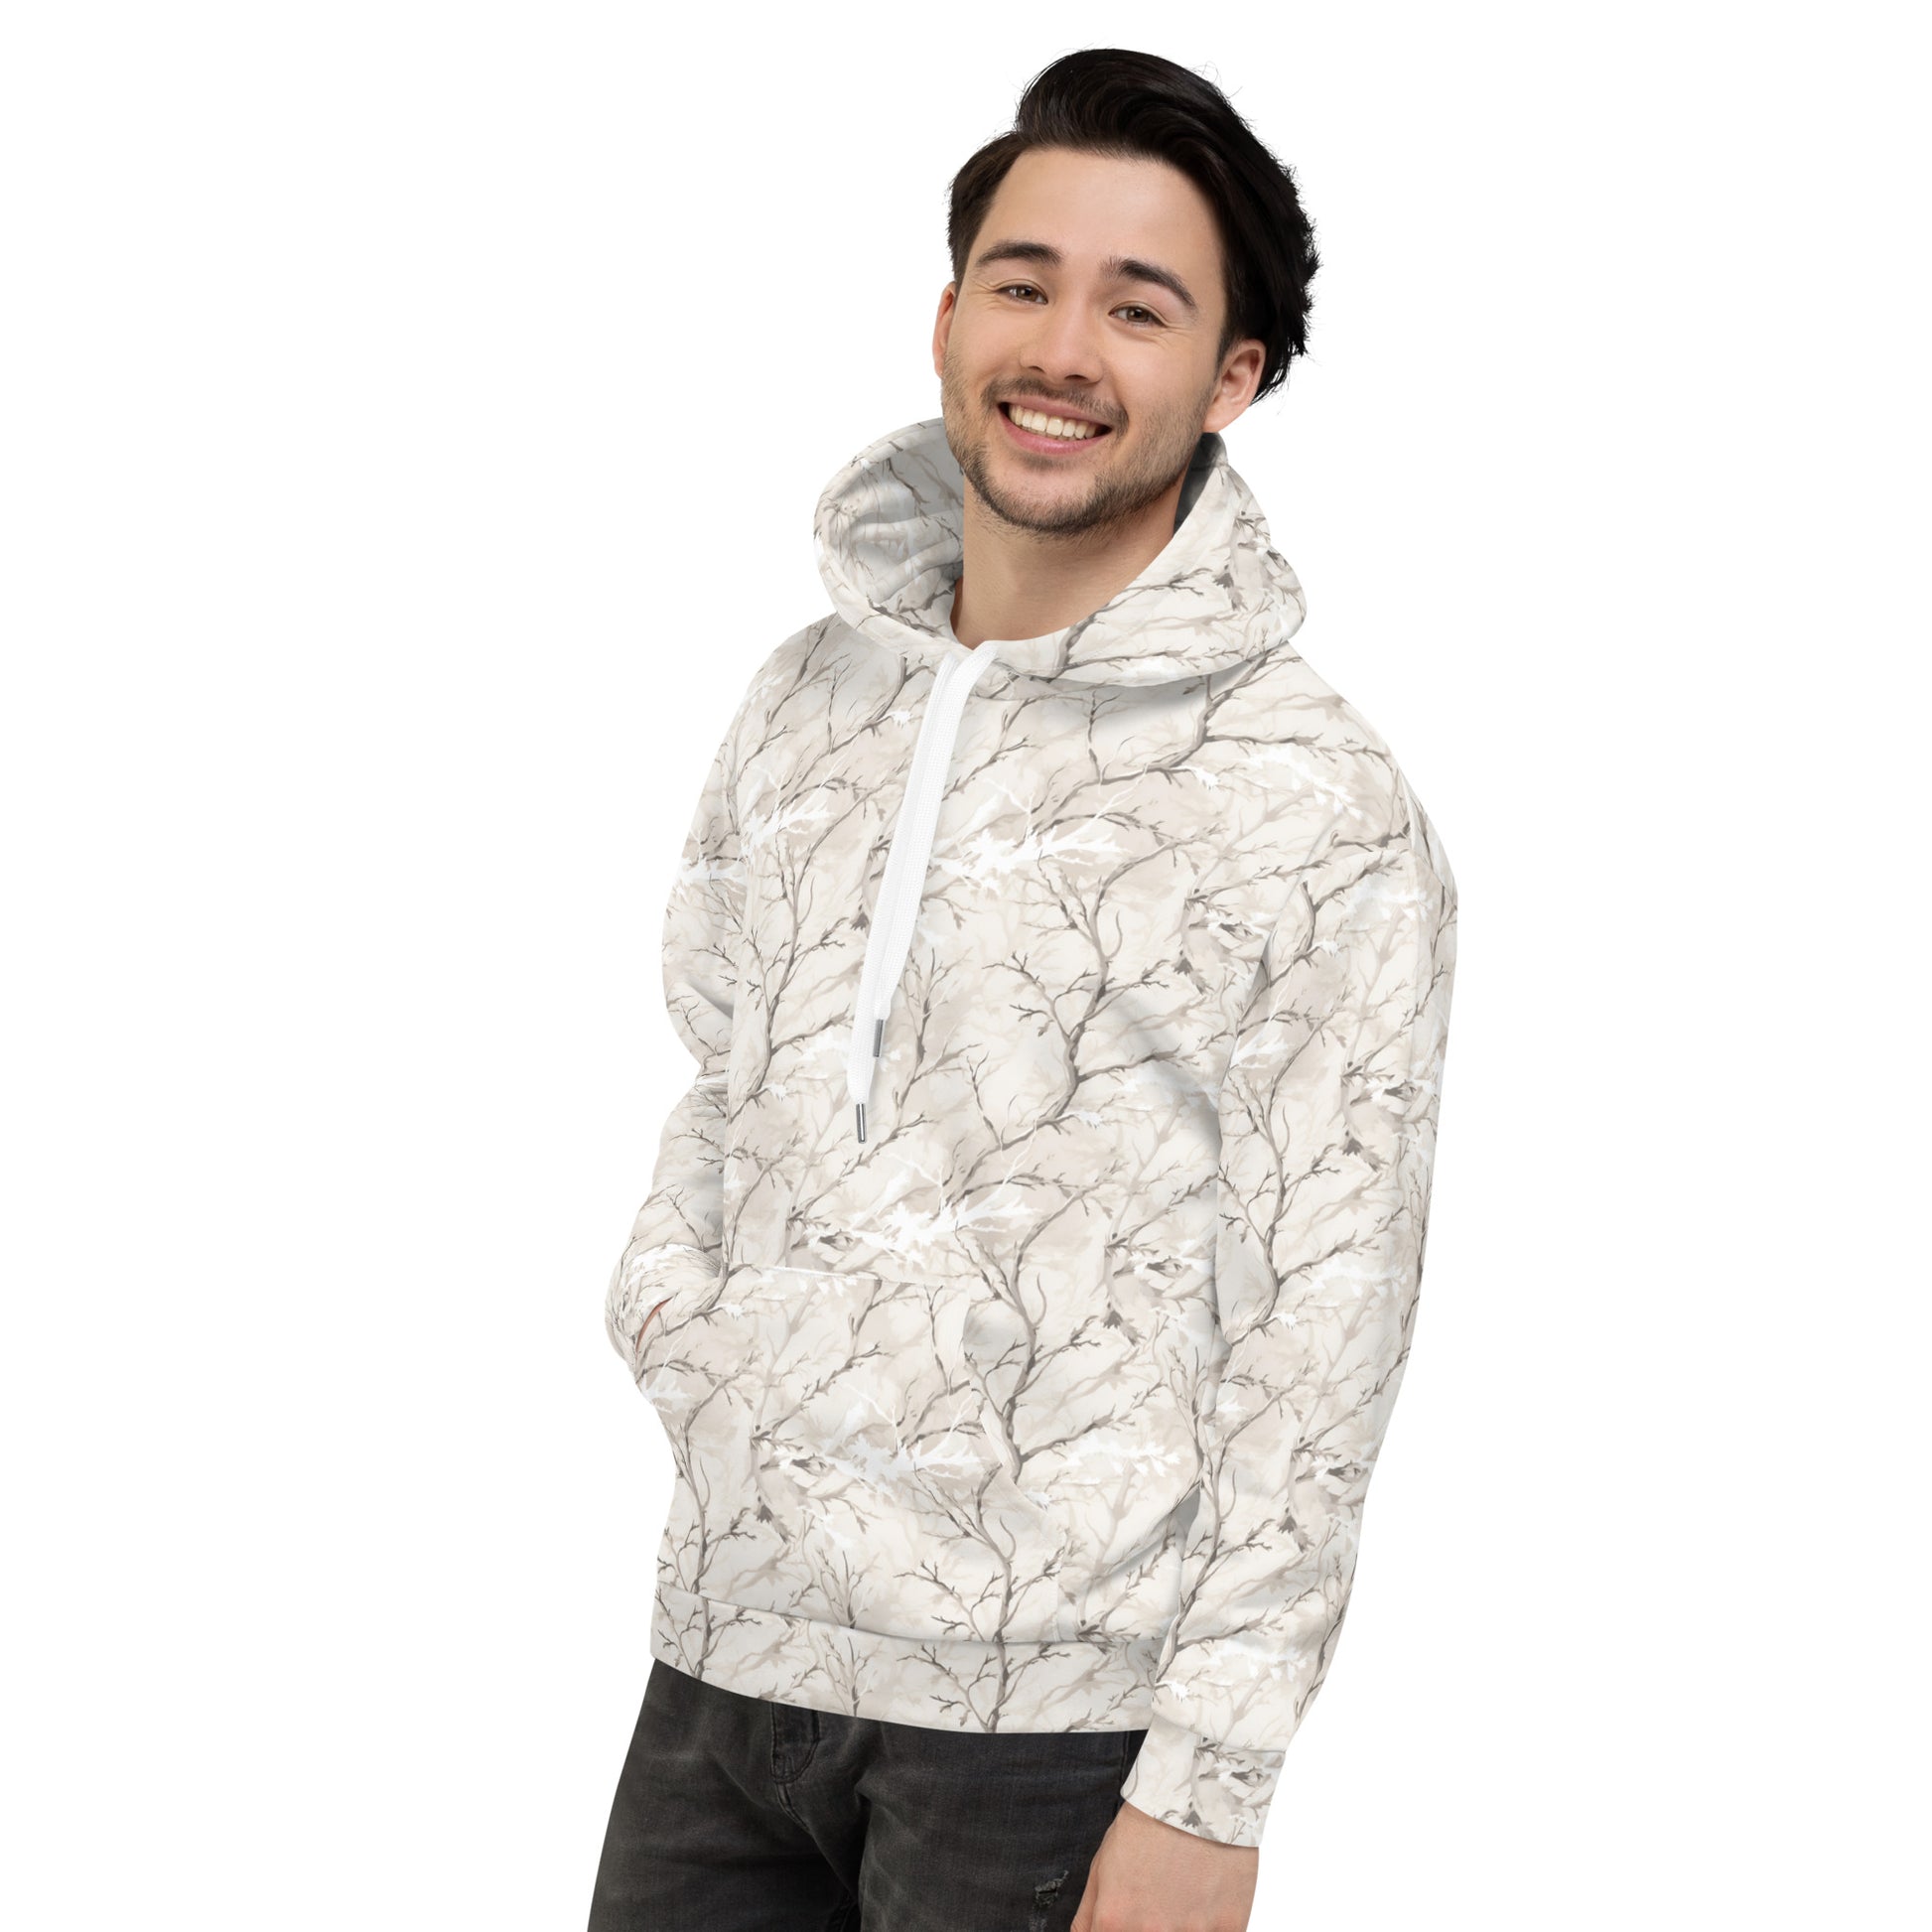 White Camo Hoodie, Real Camouflage Off Cream Pullover Men Women Adult Aesthetic Graphic Cotton Hooded Sweatshirt with Pockets Starcove Fashion